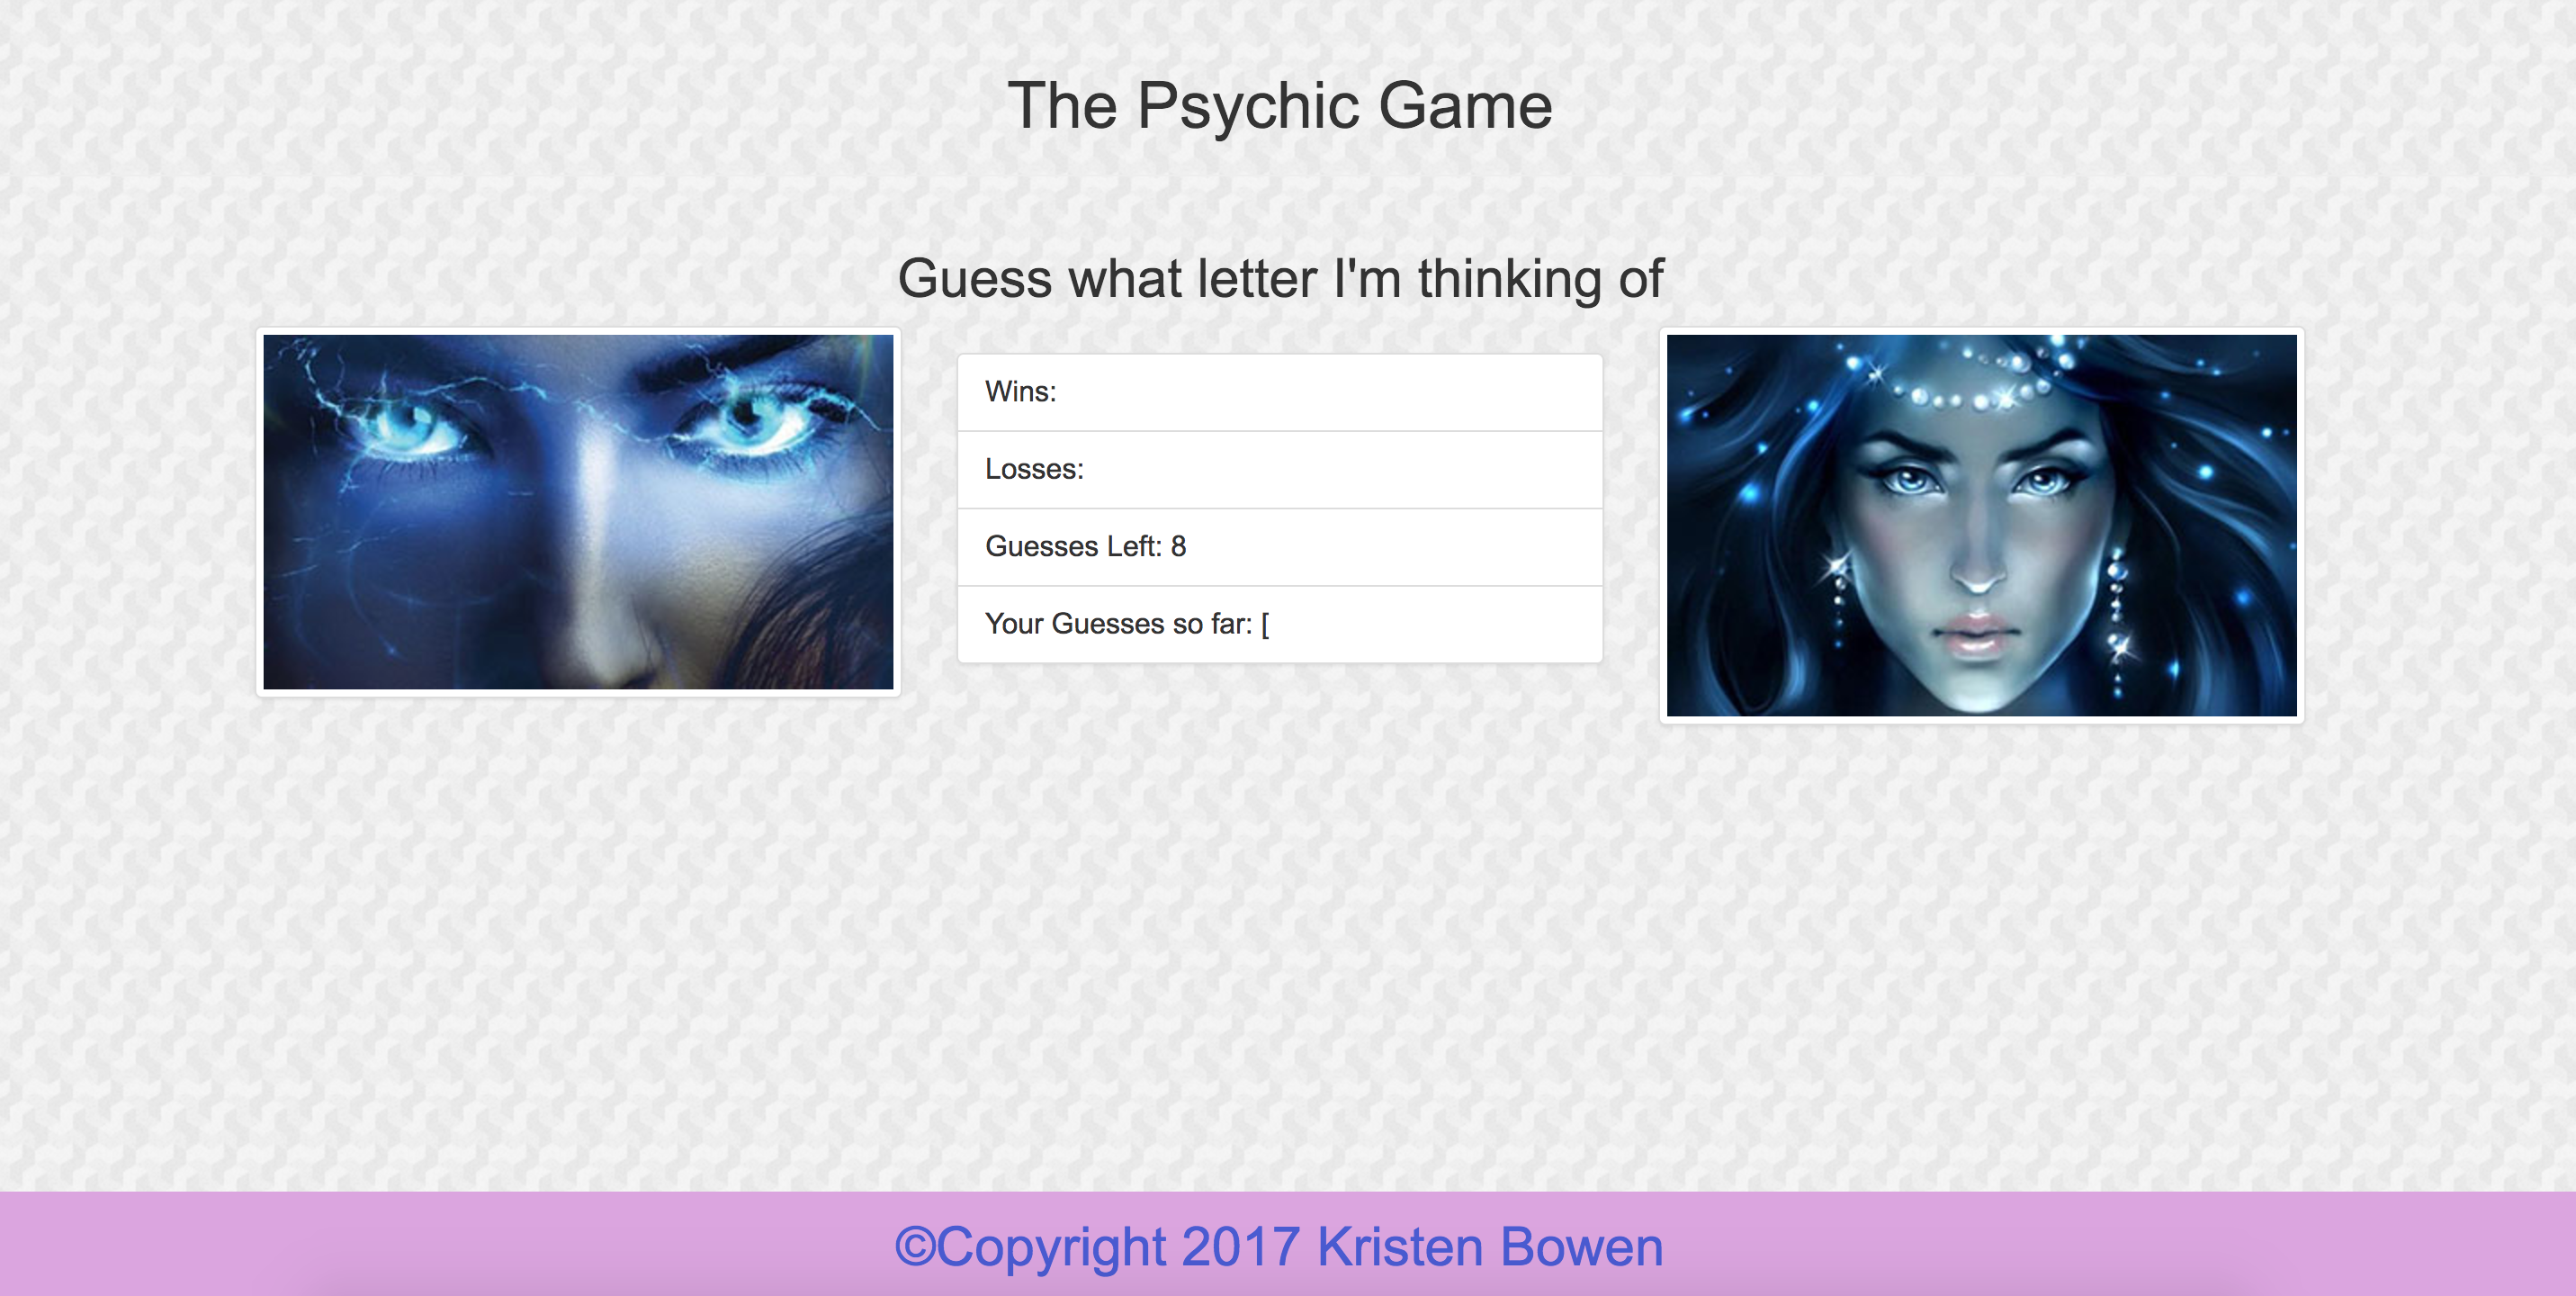 The Psychic Game